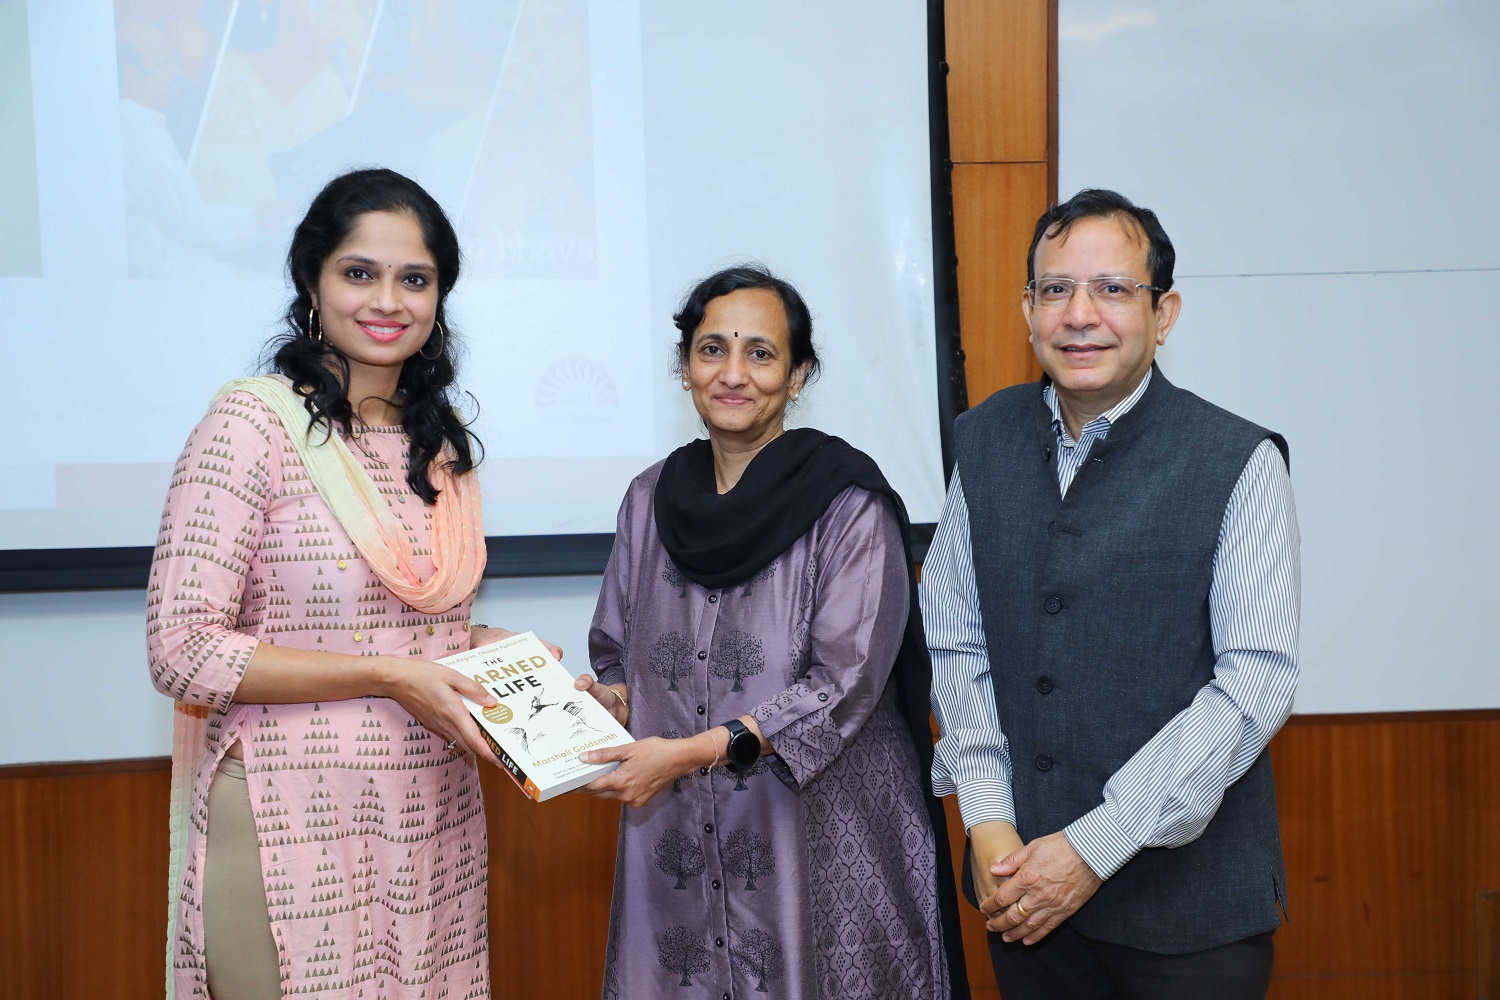 Ms. Manasi Prasad, IIMB Alumna and Museum Director, Indian Music Experience, spoke at the case discussion ‘Career at Crossroads’ as part of the course ‘Managing Career Transition and Success’ on 11 January 2023. Prof. Padmini Srinivasan and Prof. Gopal Mahapatra are seen felicitating her.